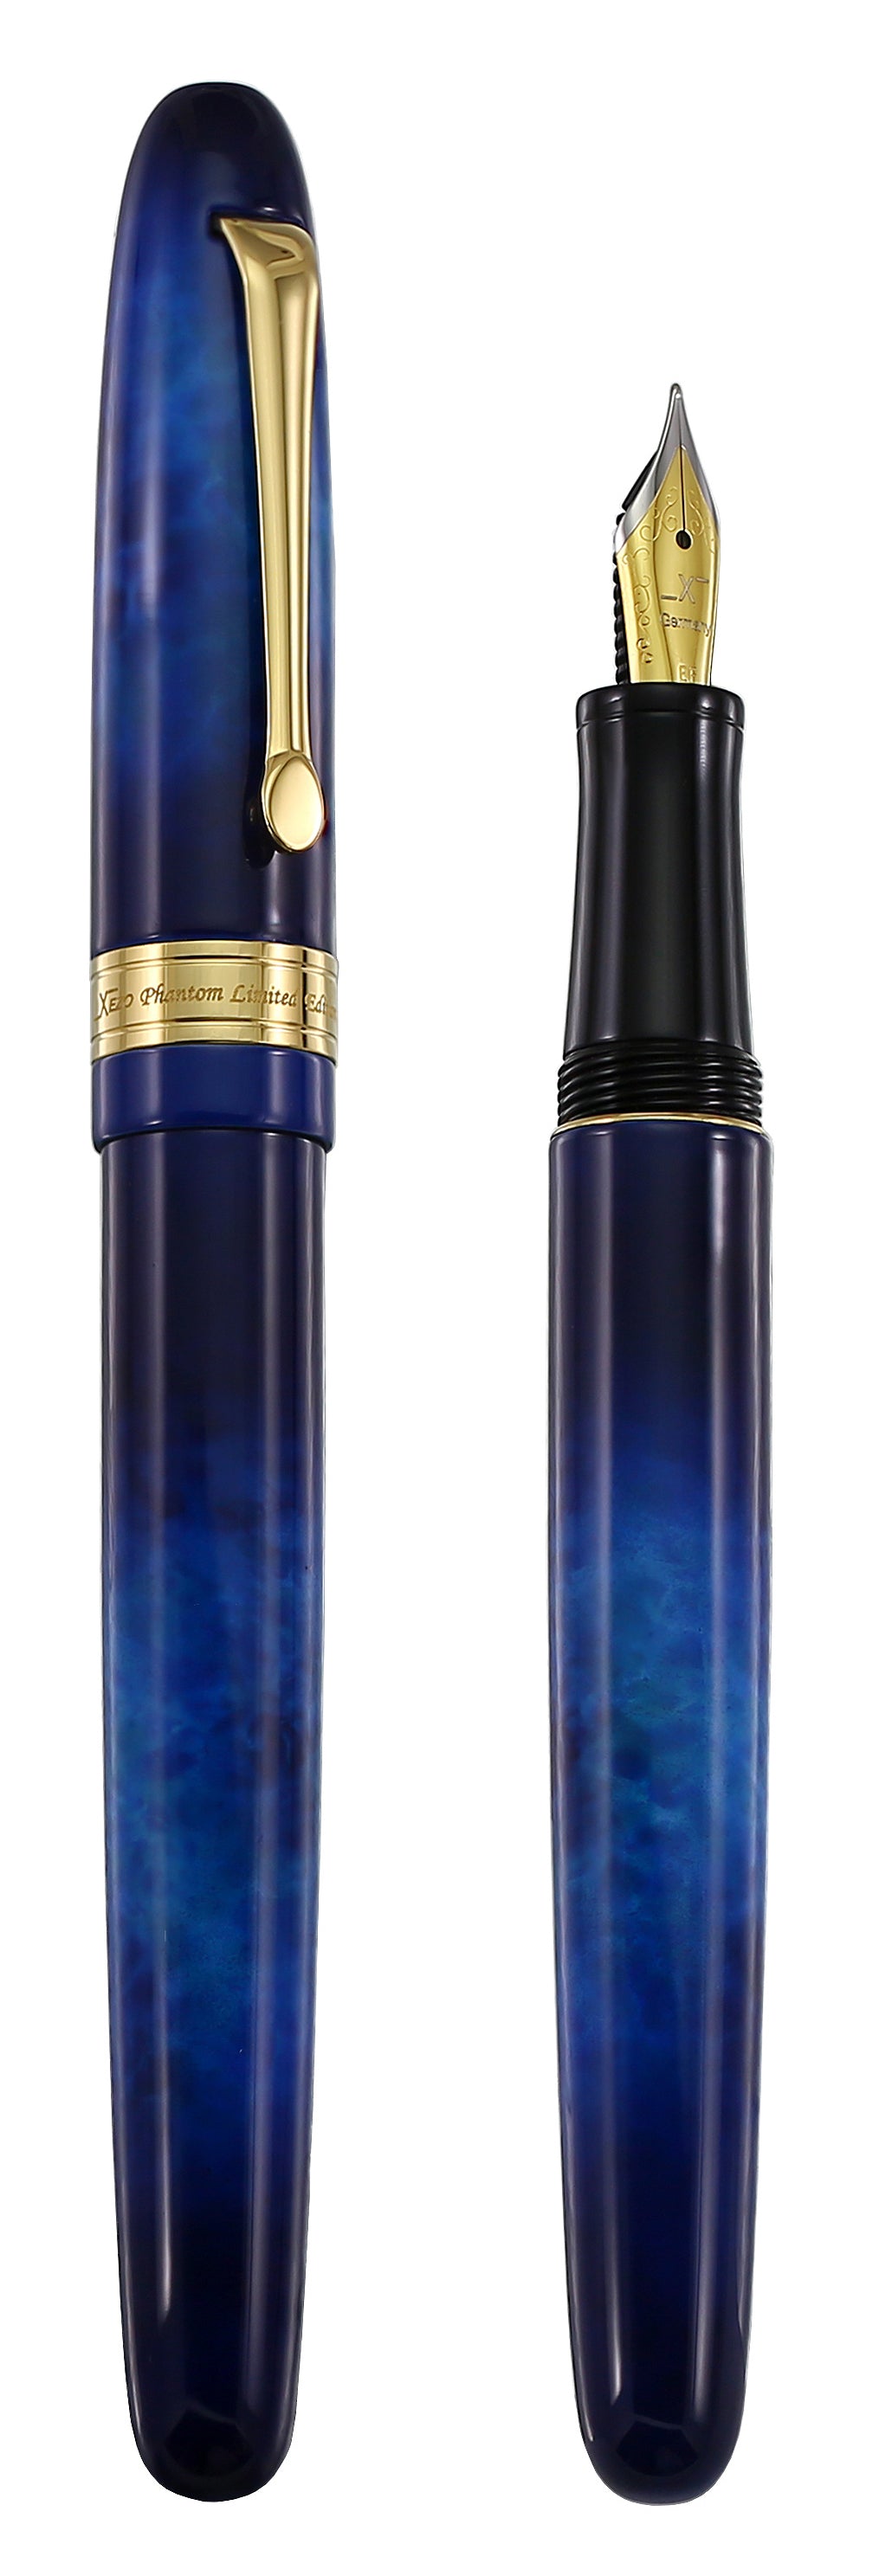 Xezo – Comparison between 3/4 view of the capped and uncapped Phantom Stardust F fountain pens